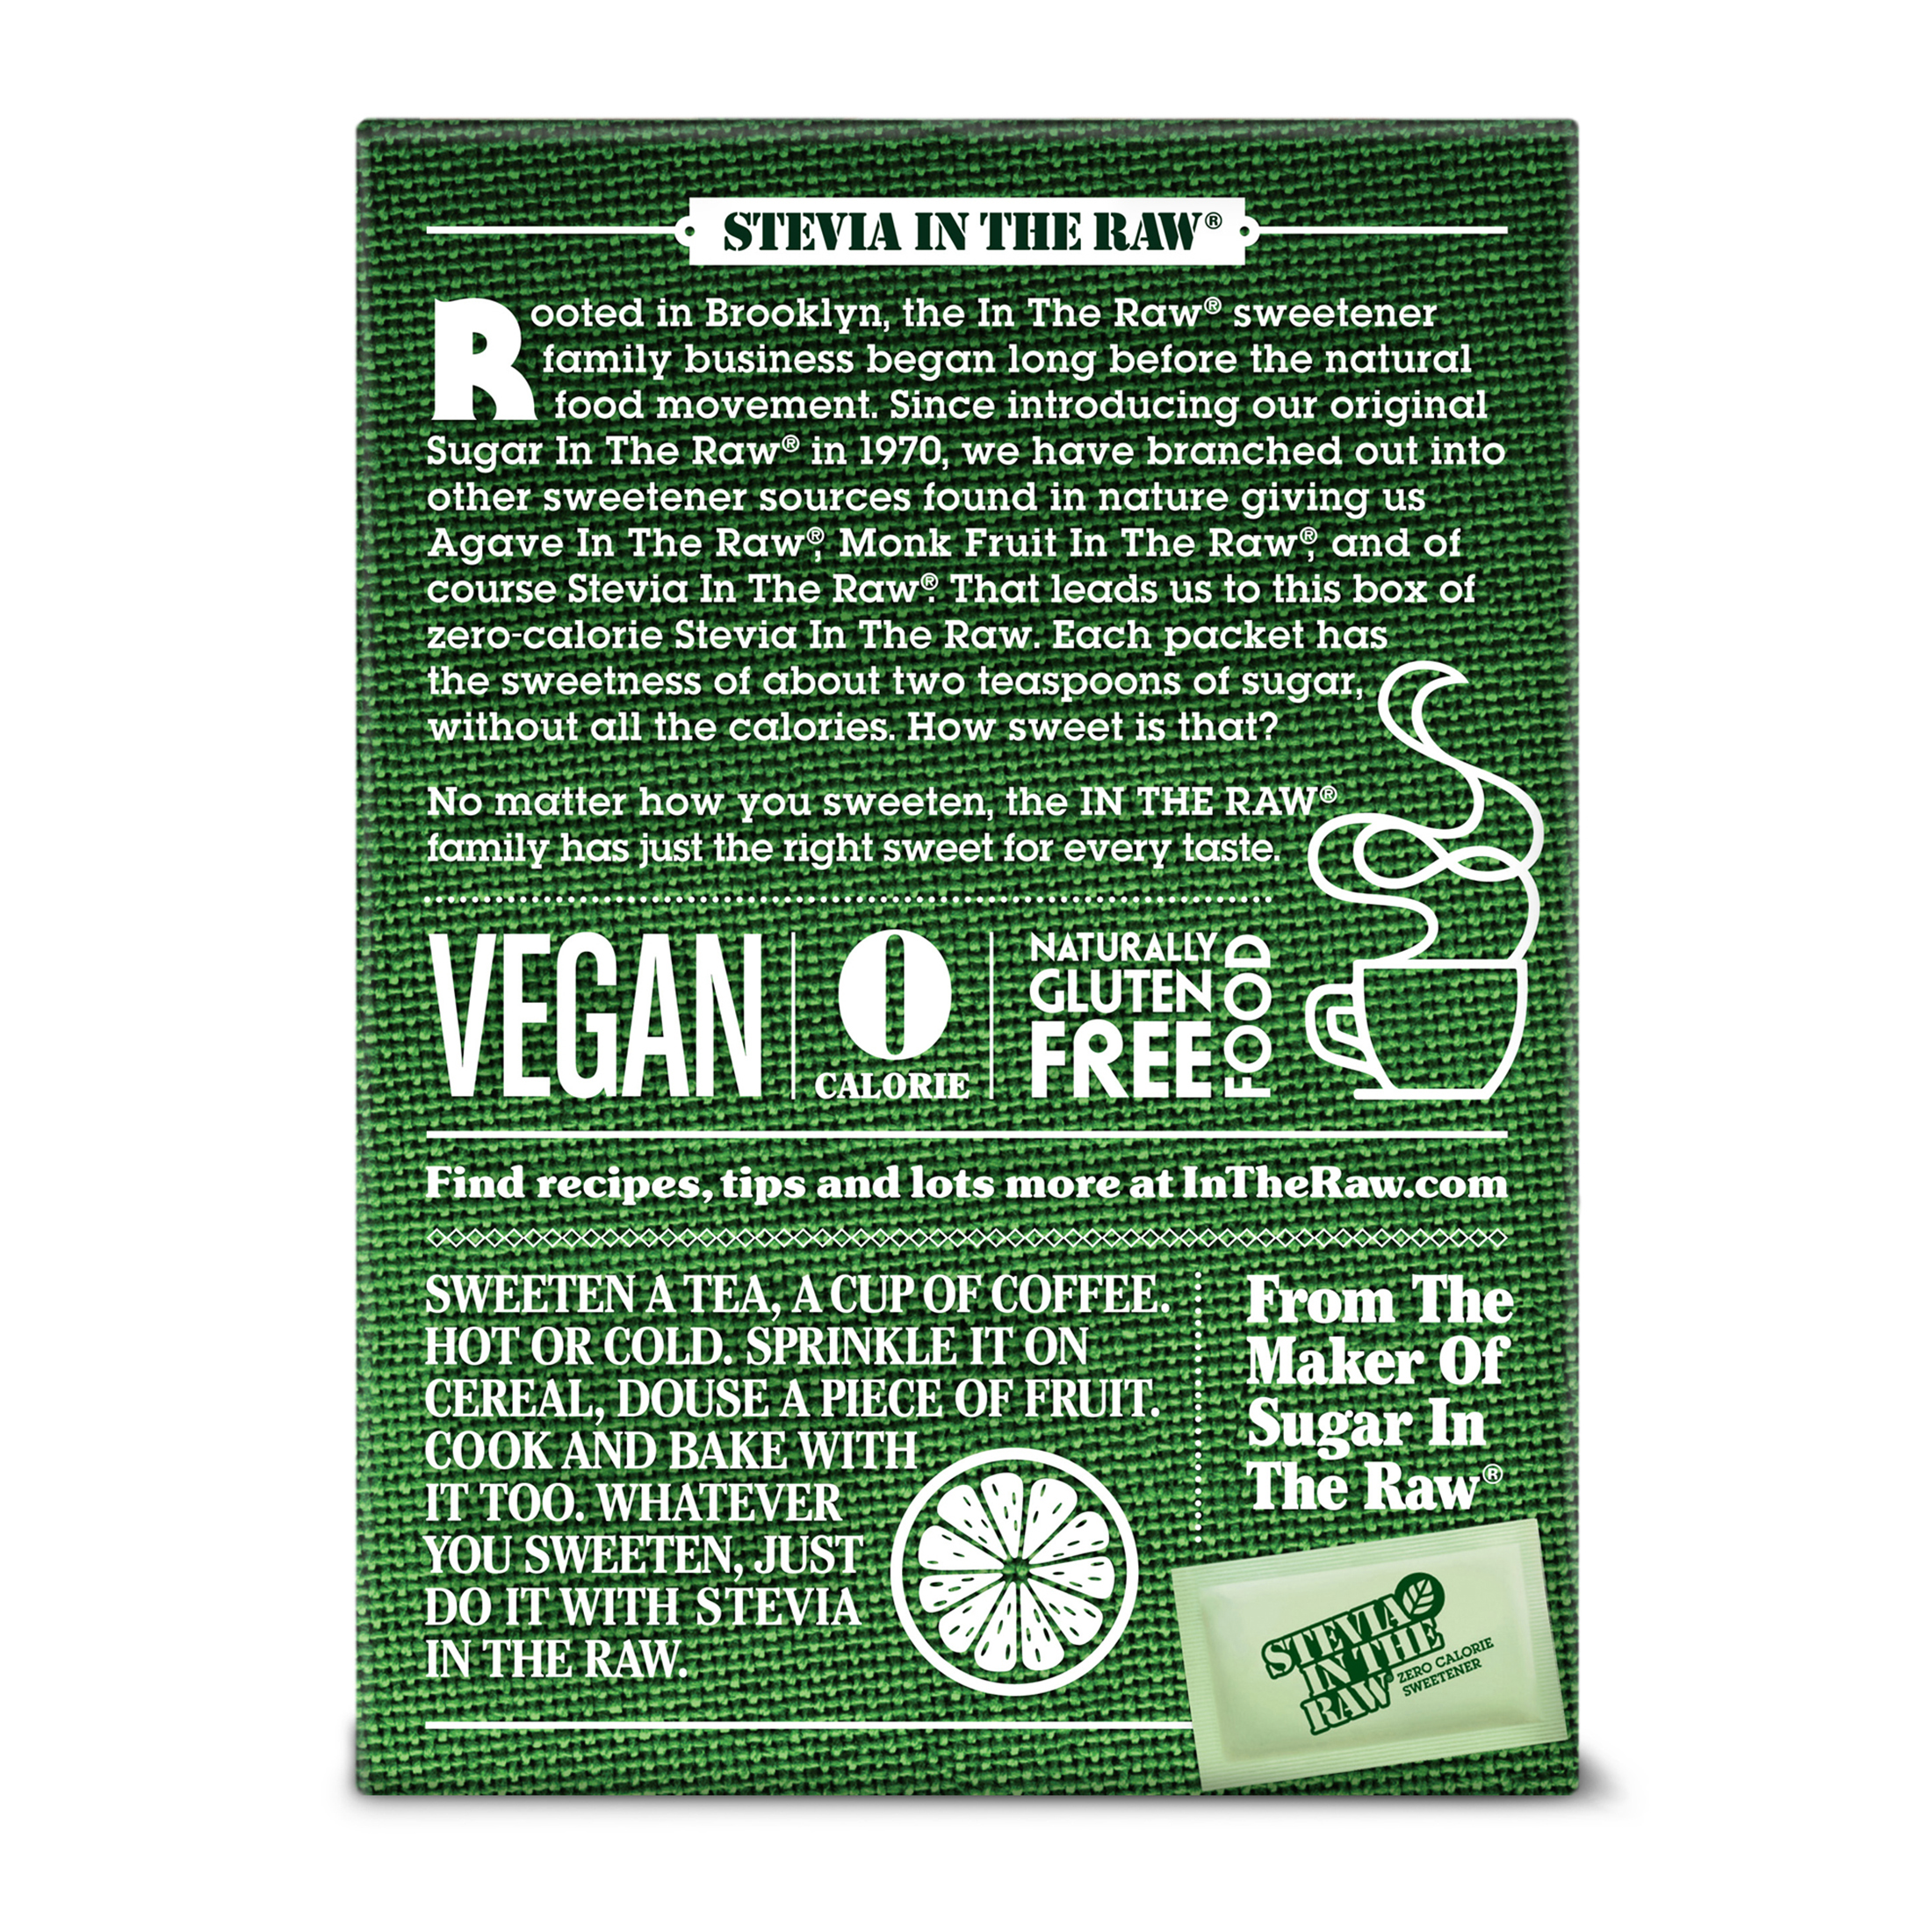 Stevia In The Raw Zero Calorie Sweetener, 100 count, 3.5 oz - image 2 of 9